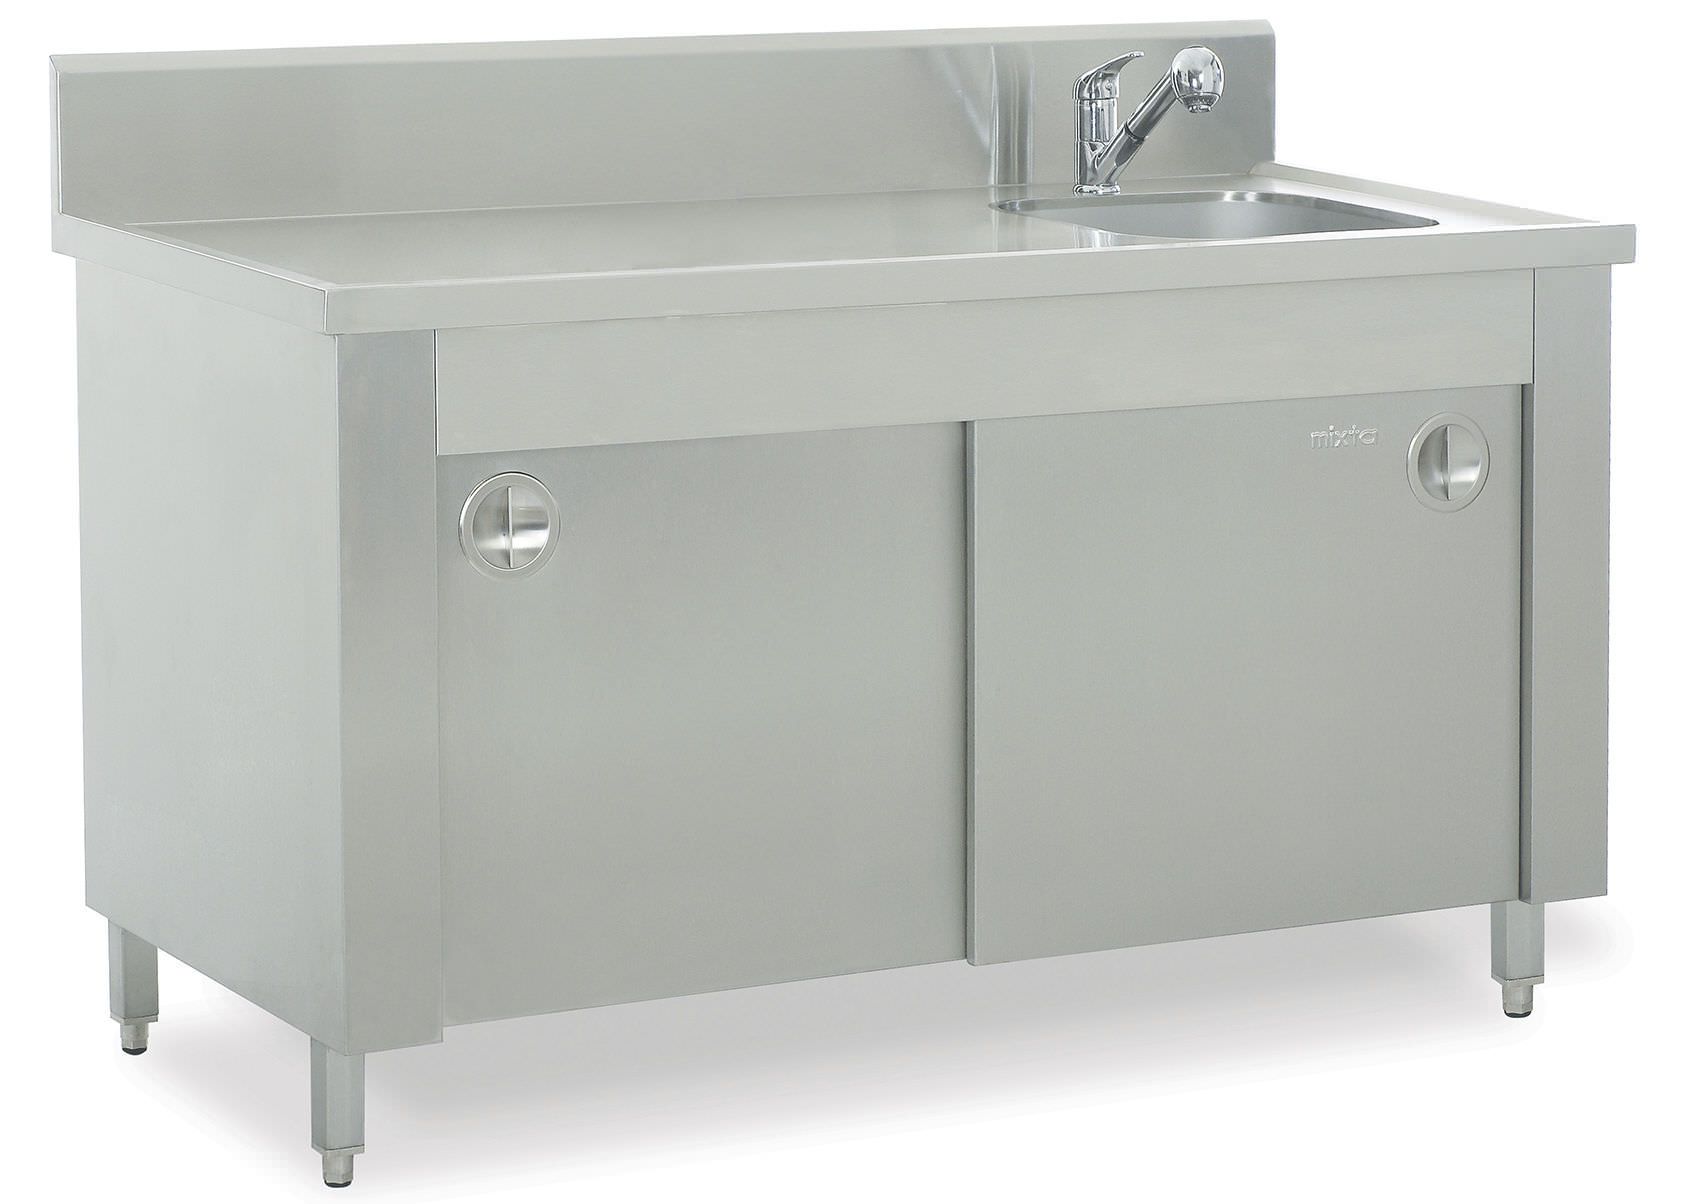 Changing table / with bath MBE 1060 MIXTA STAINLESS STEEL HOSPITAL EQUIPMENTS